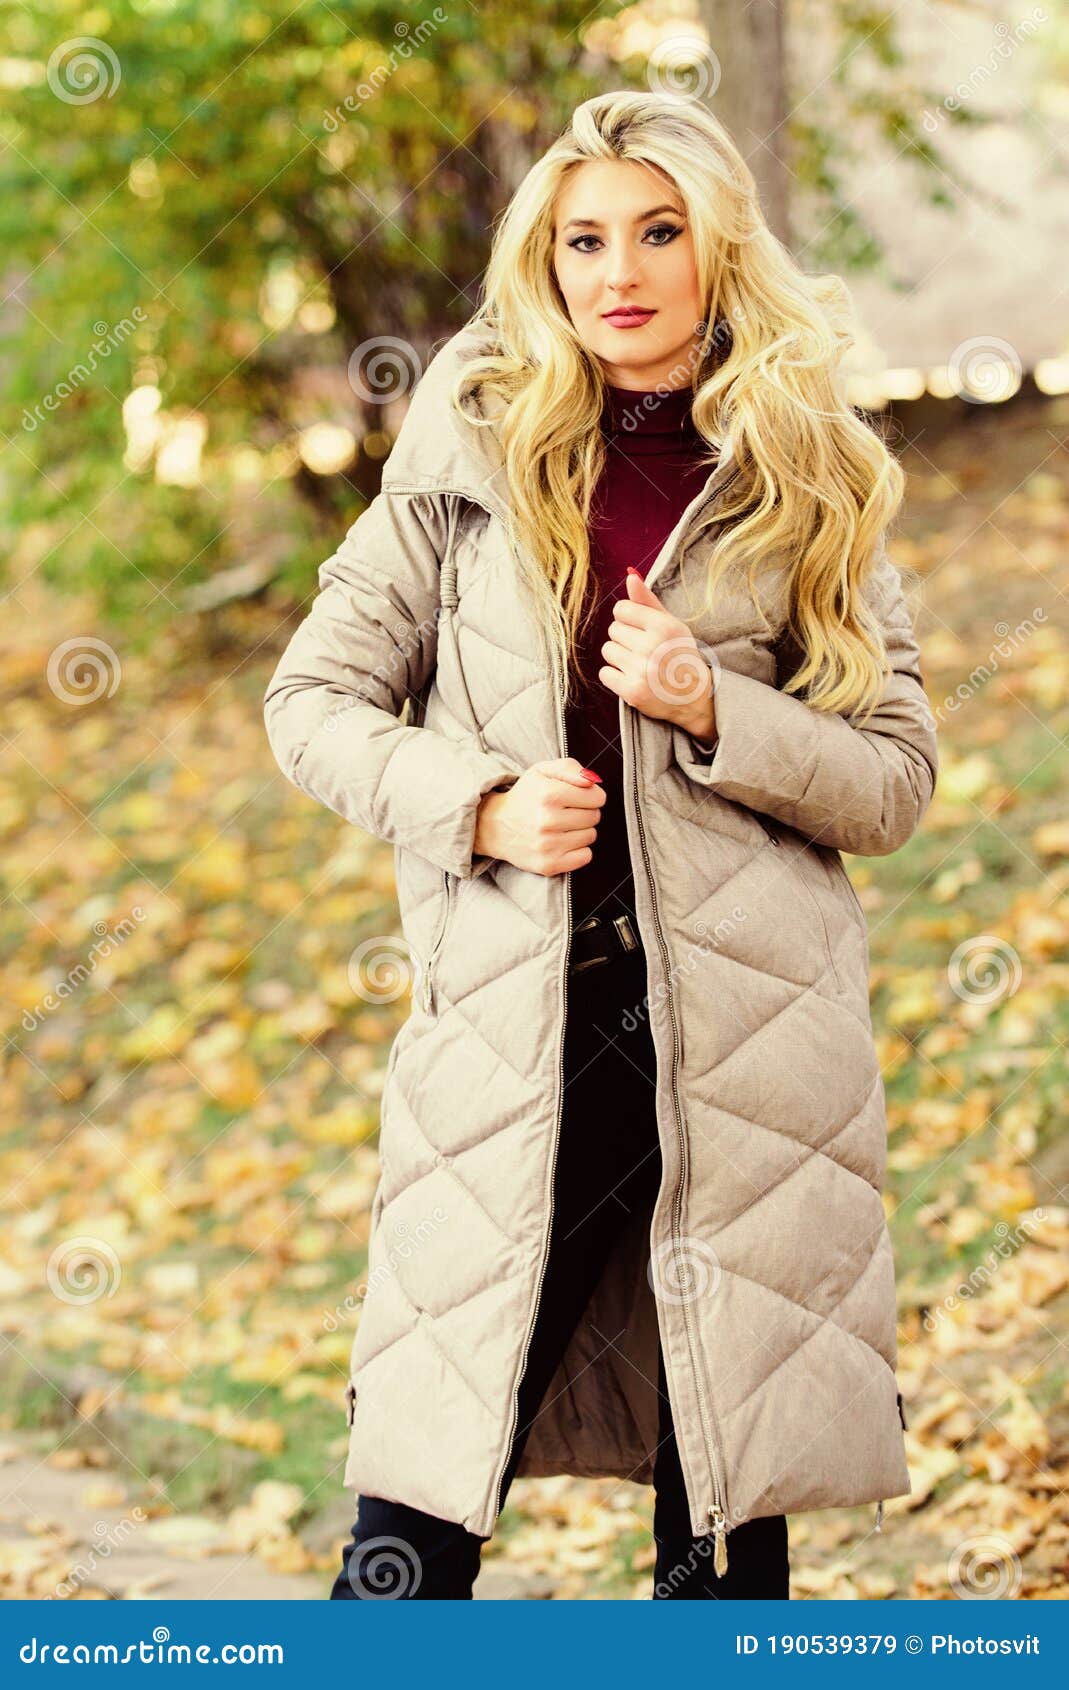 Oversized Jacket Trend. How To Rock Puffer Jacket Like Star. Puffer ...